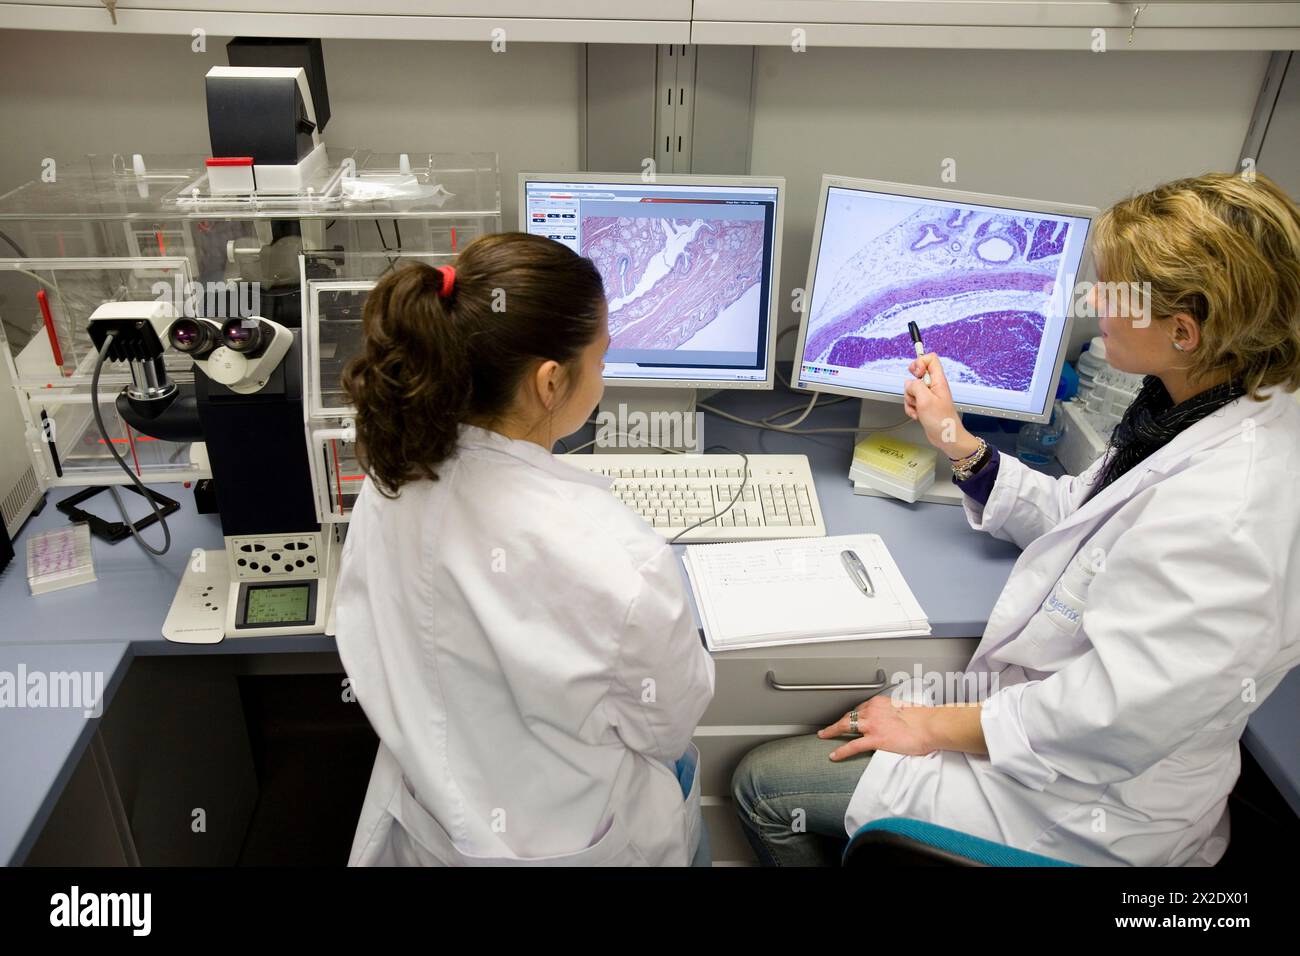 Histological cuts, confocal microscope, biopharmaceutical lab, development and production of innovative drugs using adult stem cells, Cellerix, Grupo Stock Photo